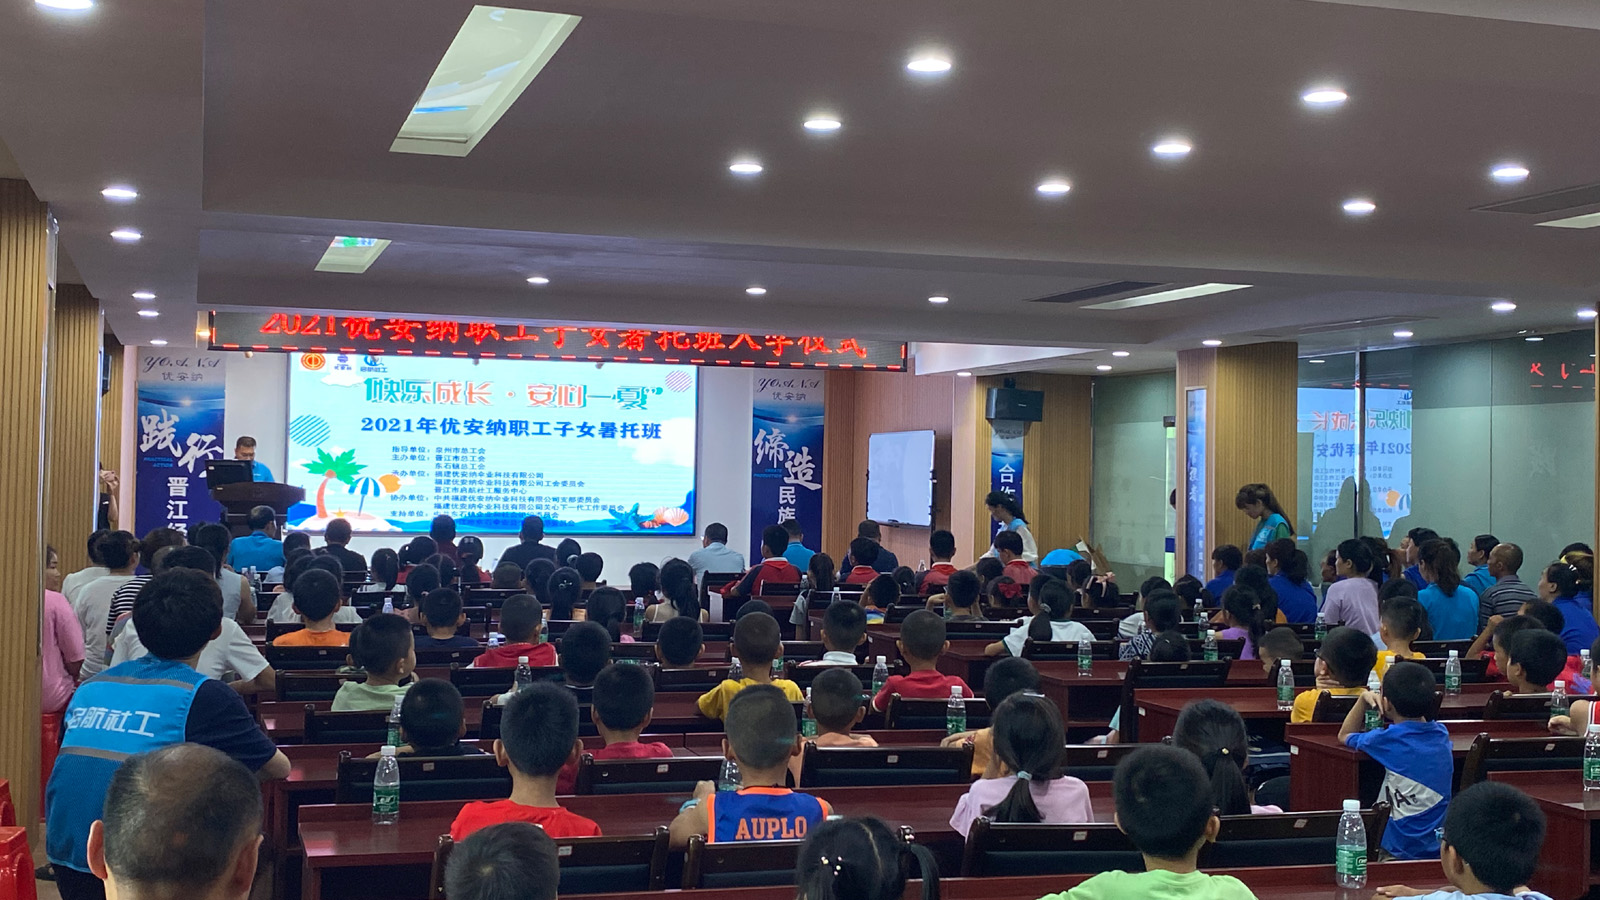 Opening ceremony of summer vacation class for employees' children